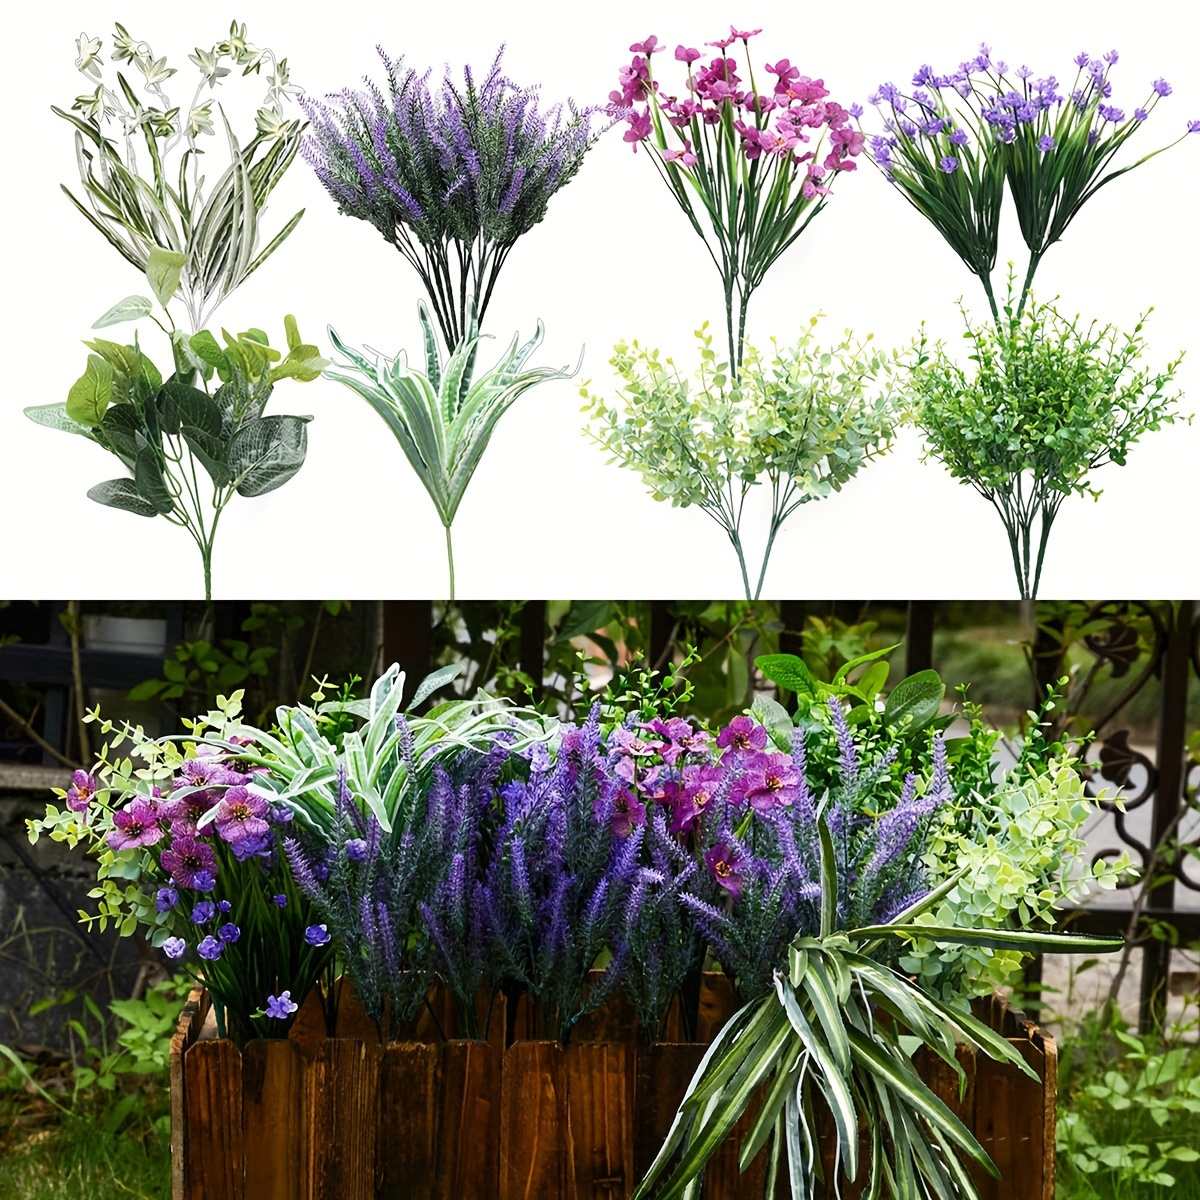 

18 Bunches Fake Plants Outdoor, Fake Bushes Uv Resistant Artificial Lavender Flowers Greenery Shrubs Faux Greenery For Outdoor Garden Patio Front Porch Yard Decor